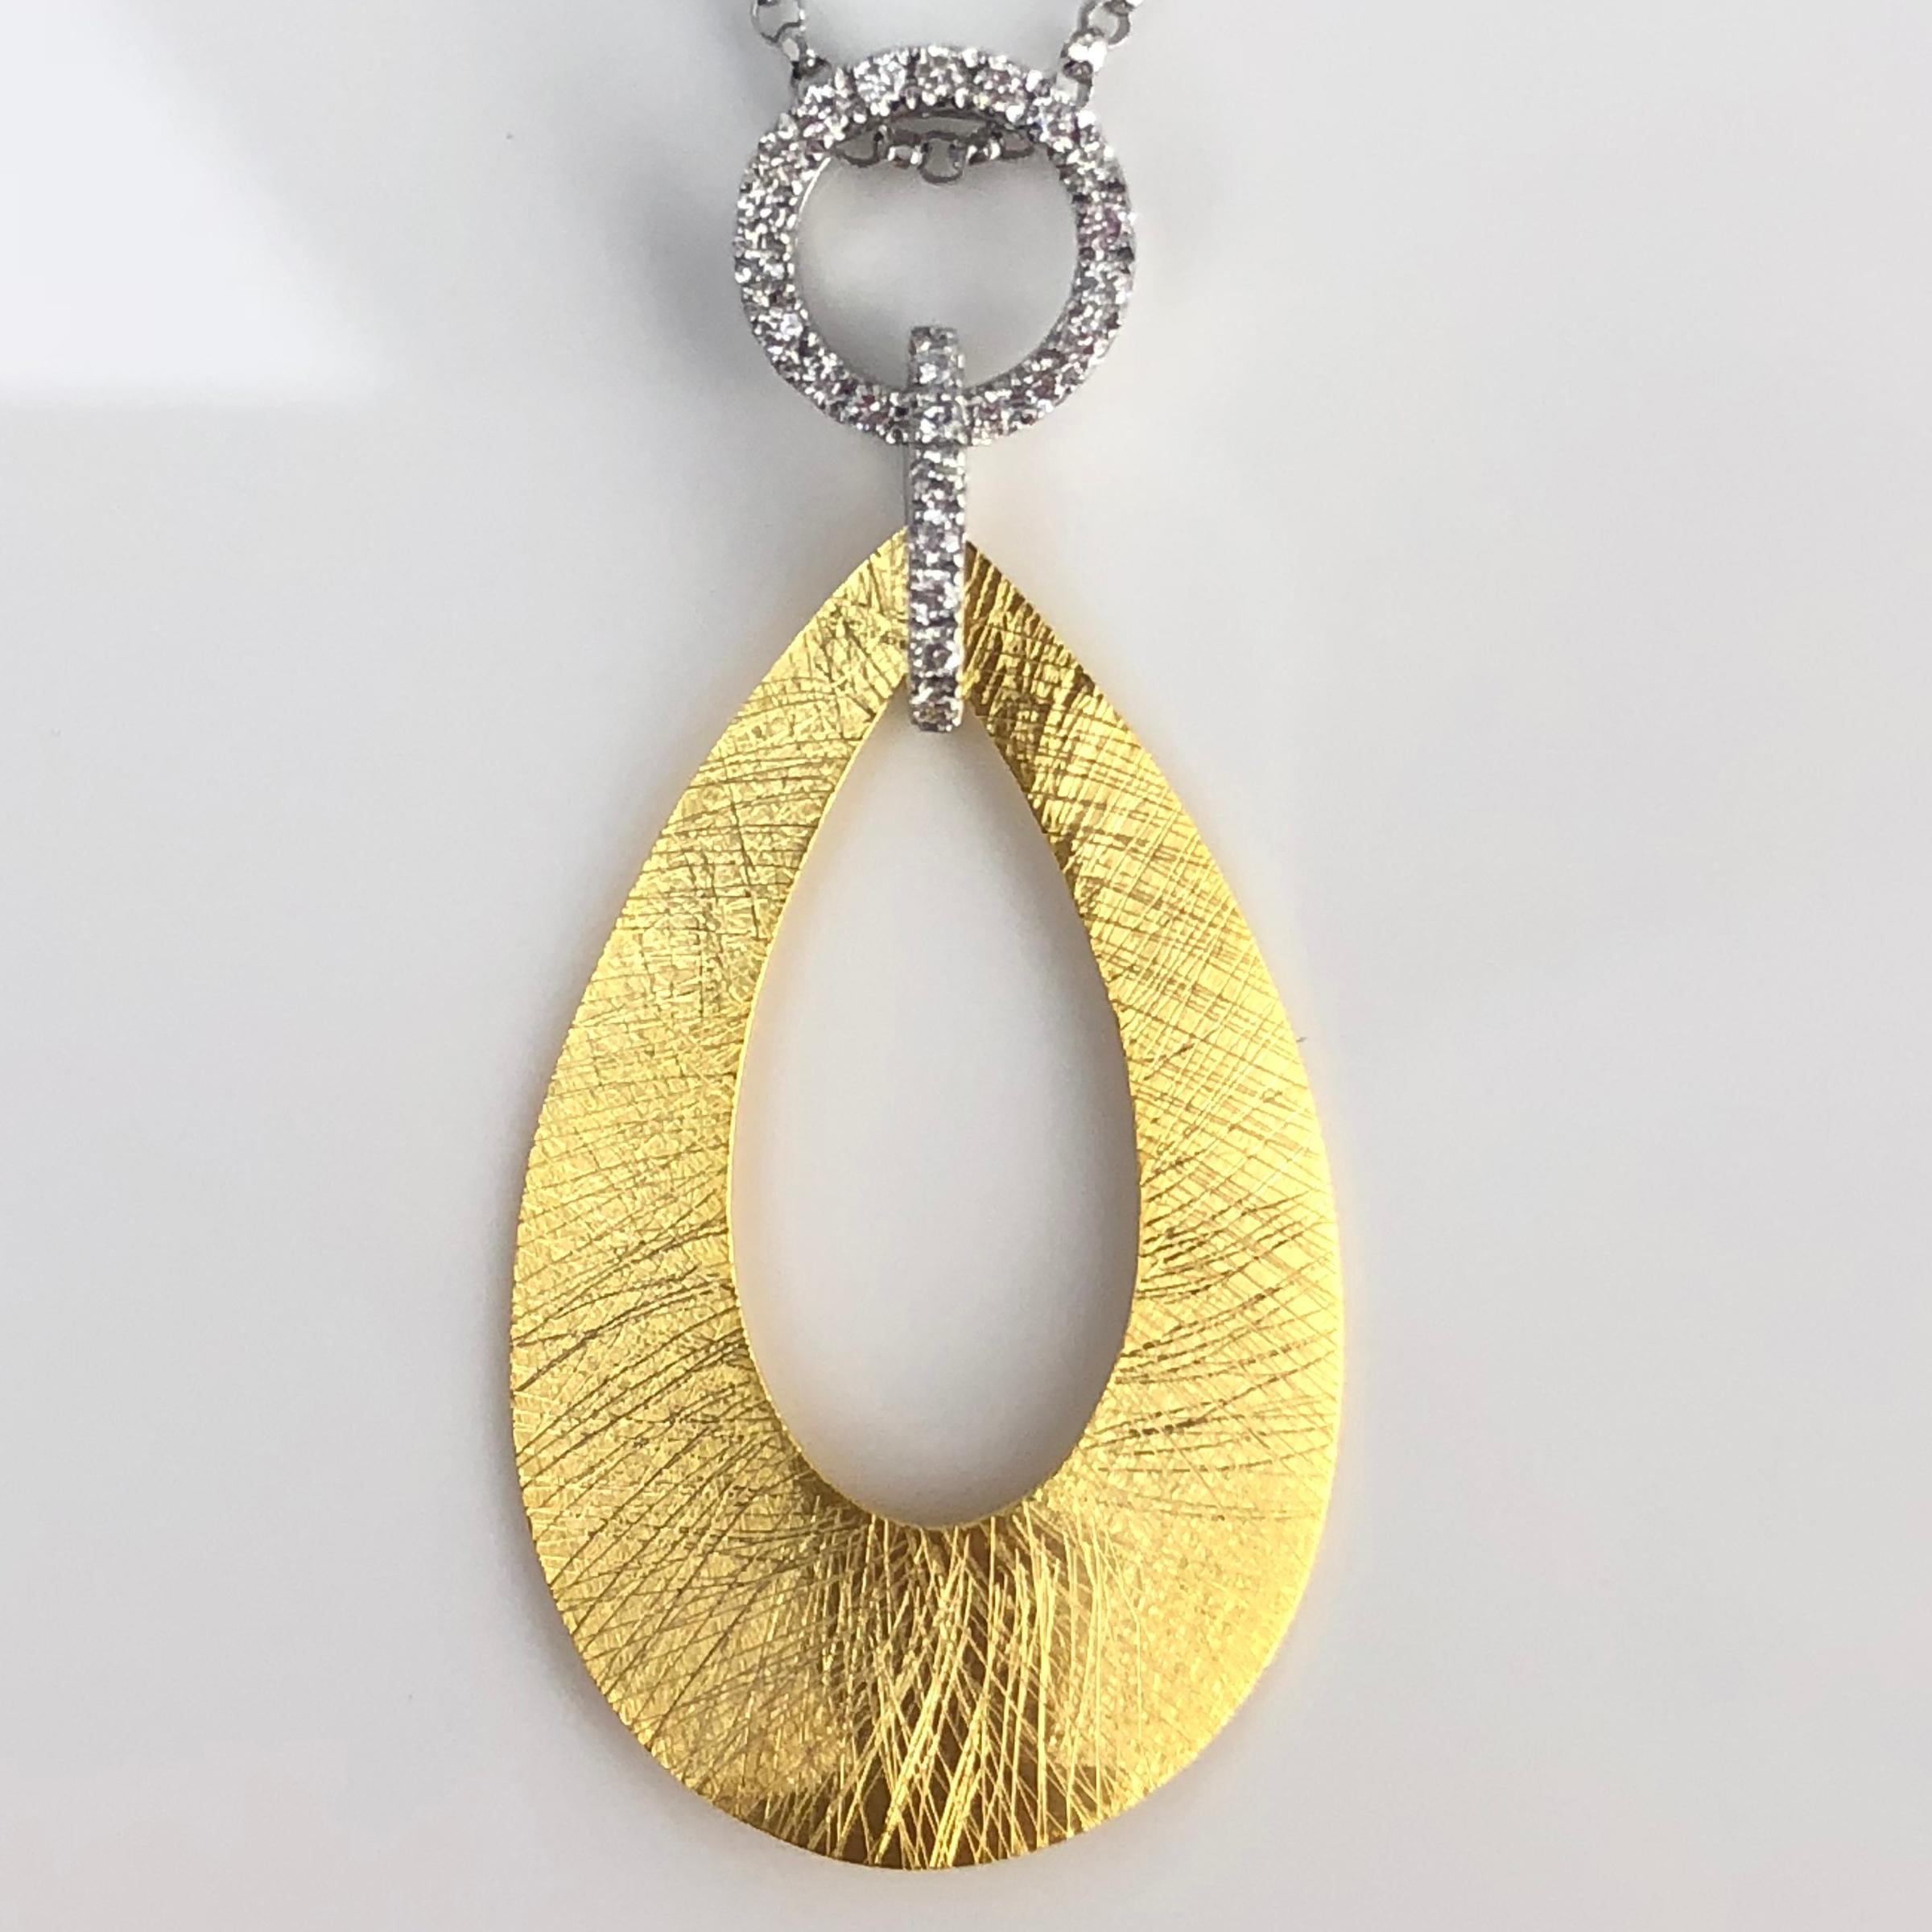 This pendant is a teardrop disc, with a teardrop cutout, with 0.12 carats round diamonds decorating the bail. Set in 14k Yellow and White Gold.

Many of our items have matching companion pieces. Please inquire.

An insurance appraisal certificate